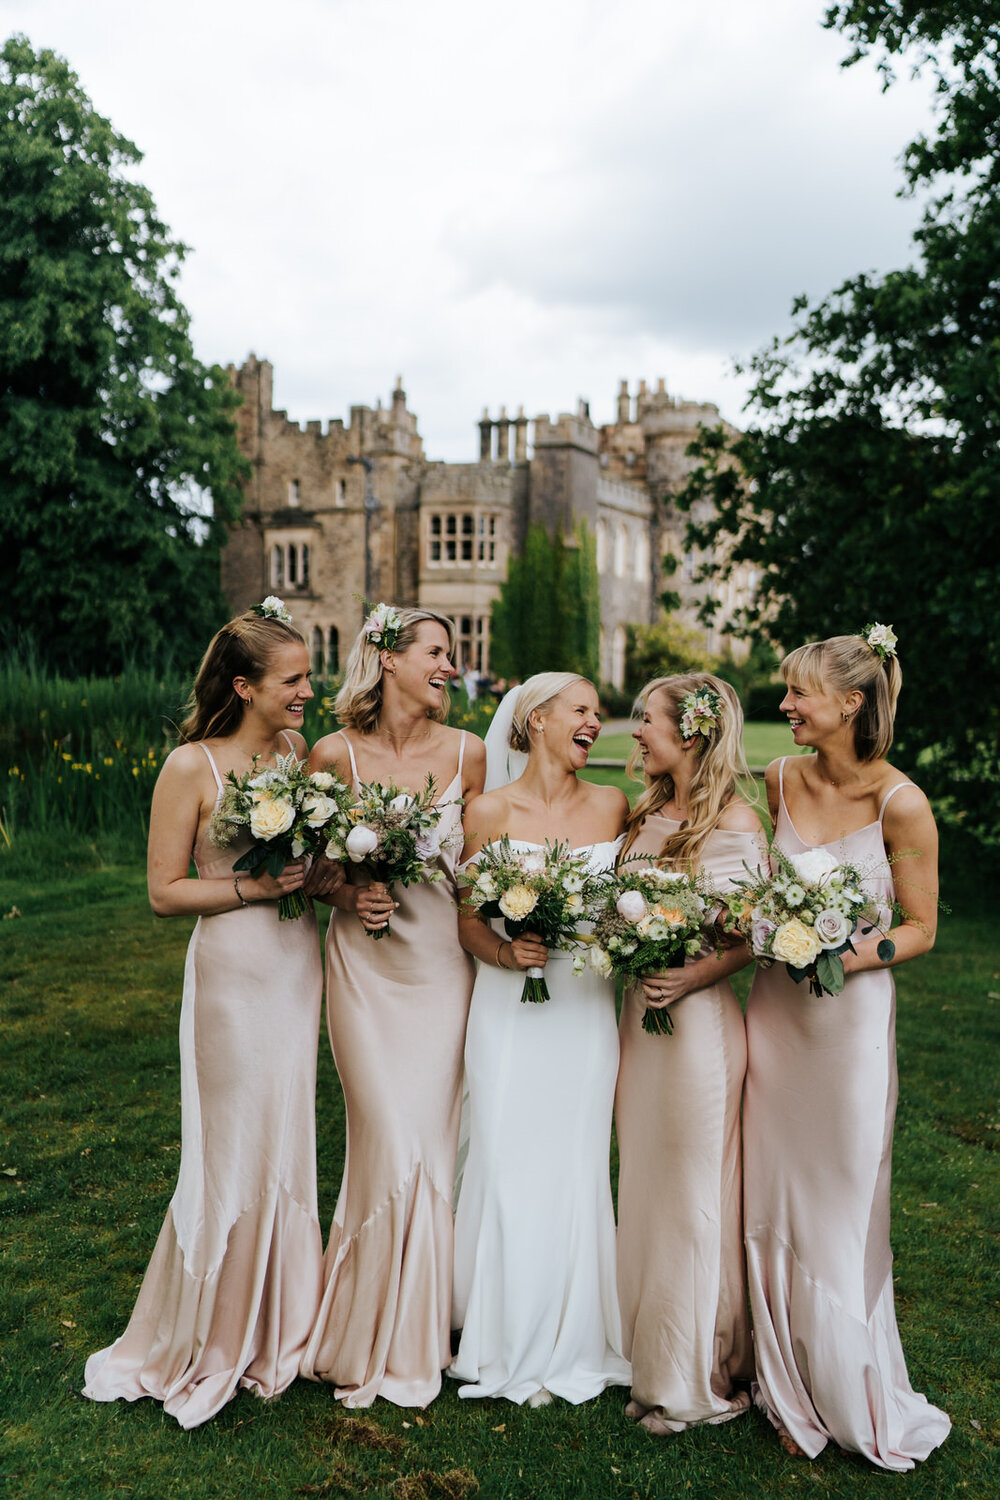 Smiling photograph of bridesmaids and bride holding bouquets with Hawarden Castle in the background